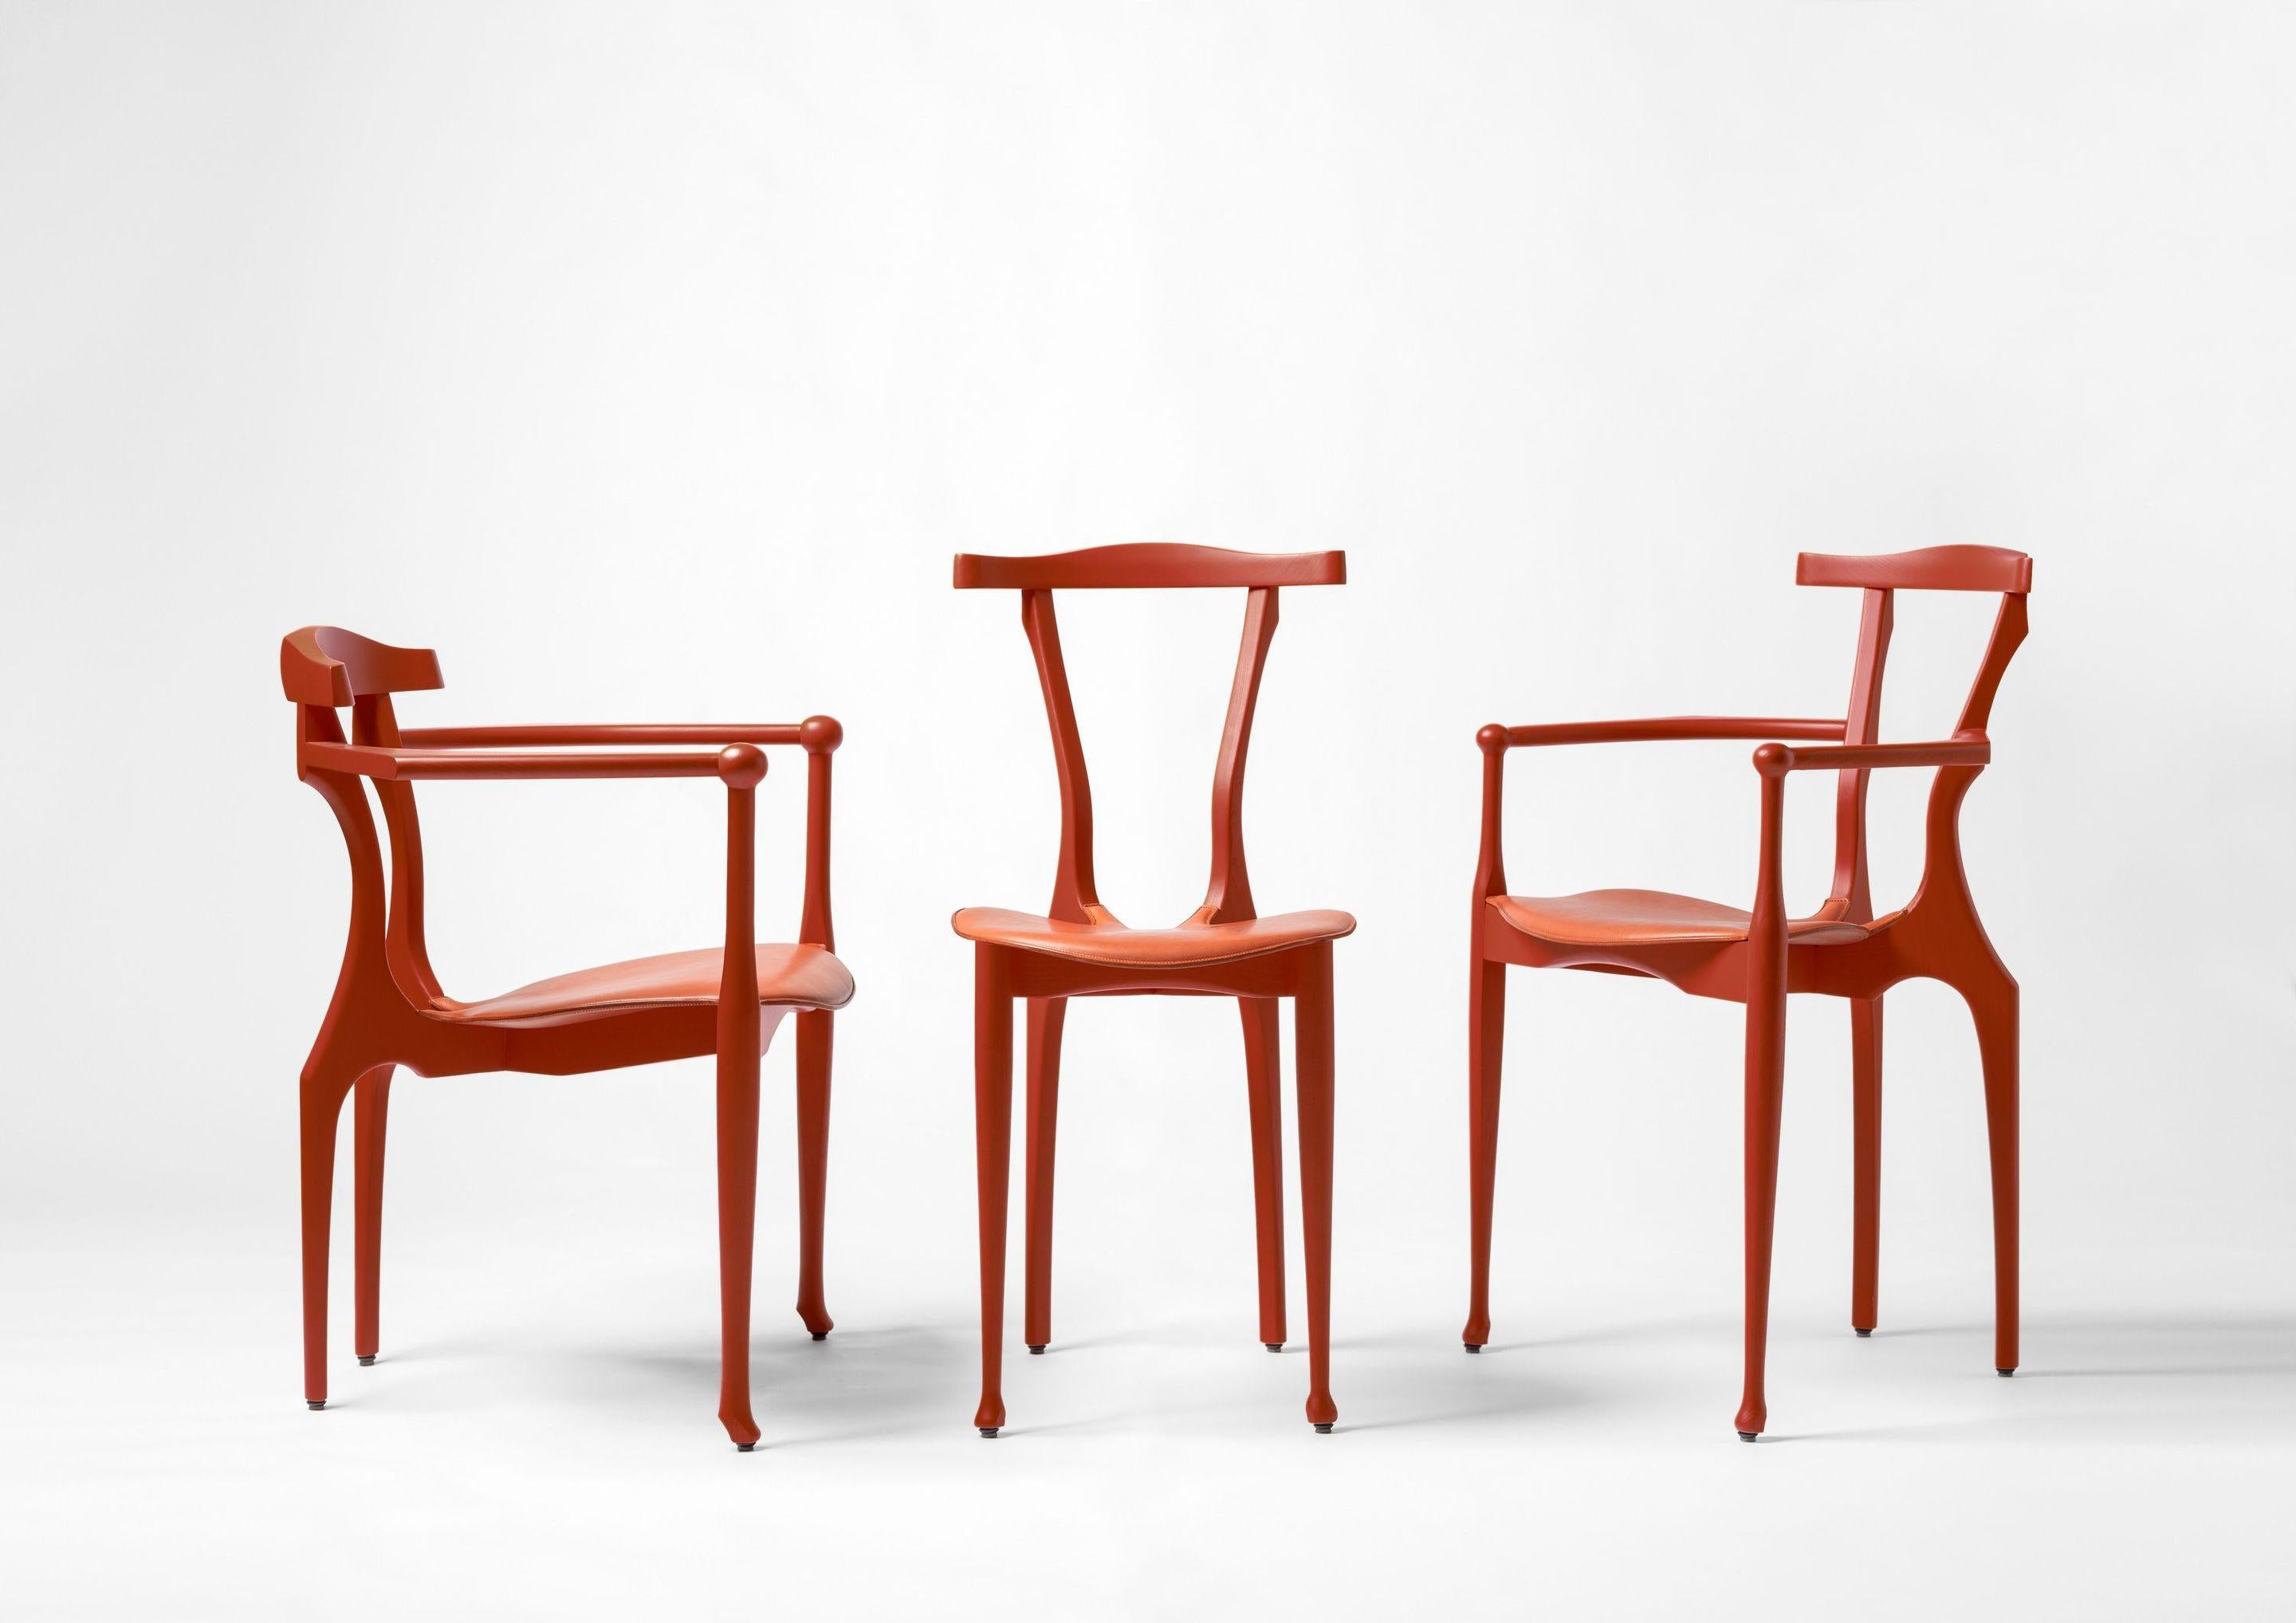 The Gaulinetta is an evolution of the Gaulino chair. In words of Oscar Tusquets: in homage to Enzo Mari, who called his chair Tonietta, a derivative of Thonet, I’ve called this chair Gaulinetta, after the Gaulino. 

The Gaulino chair was designed in